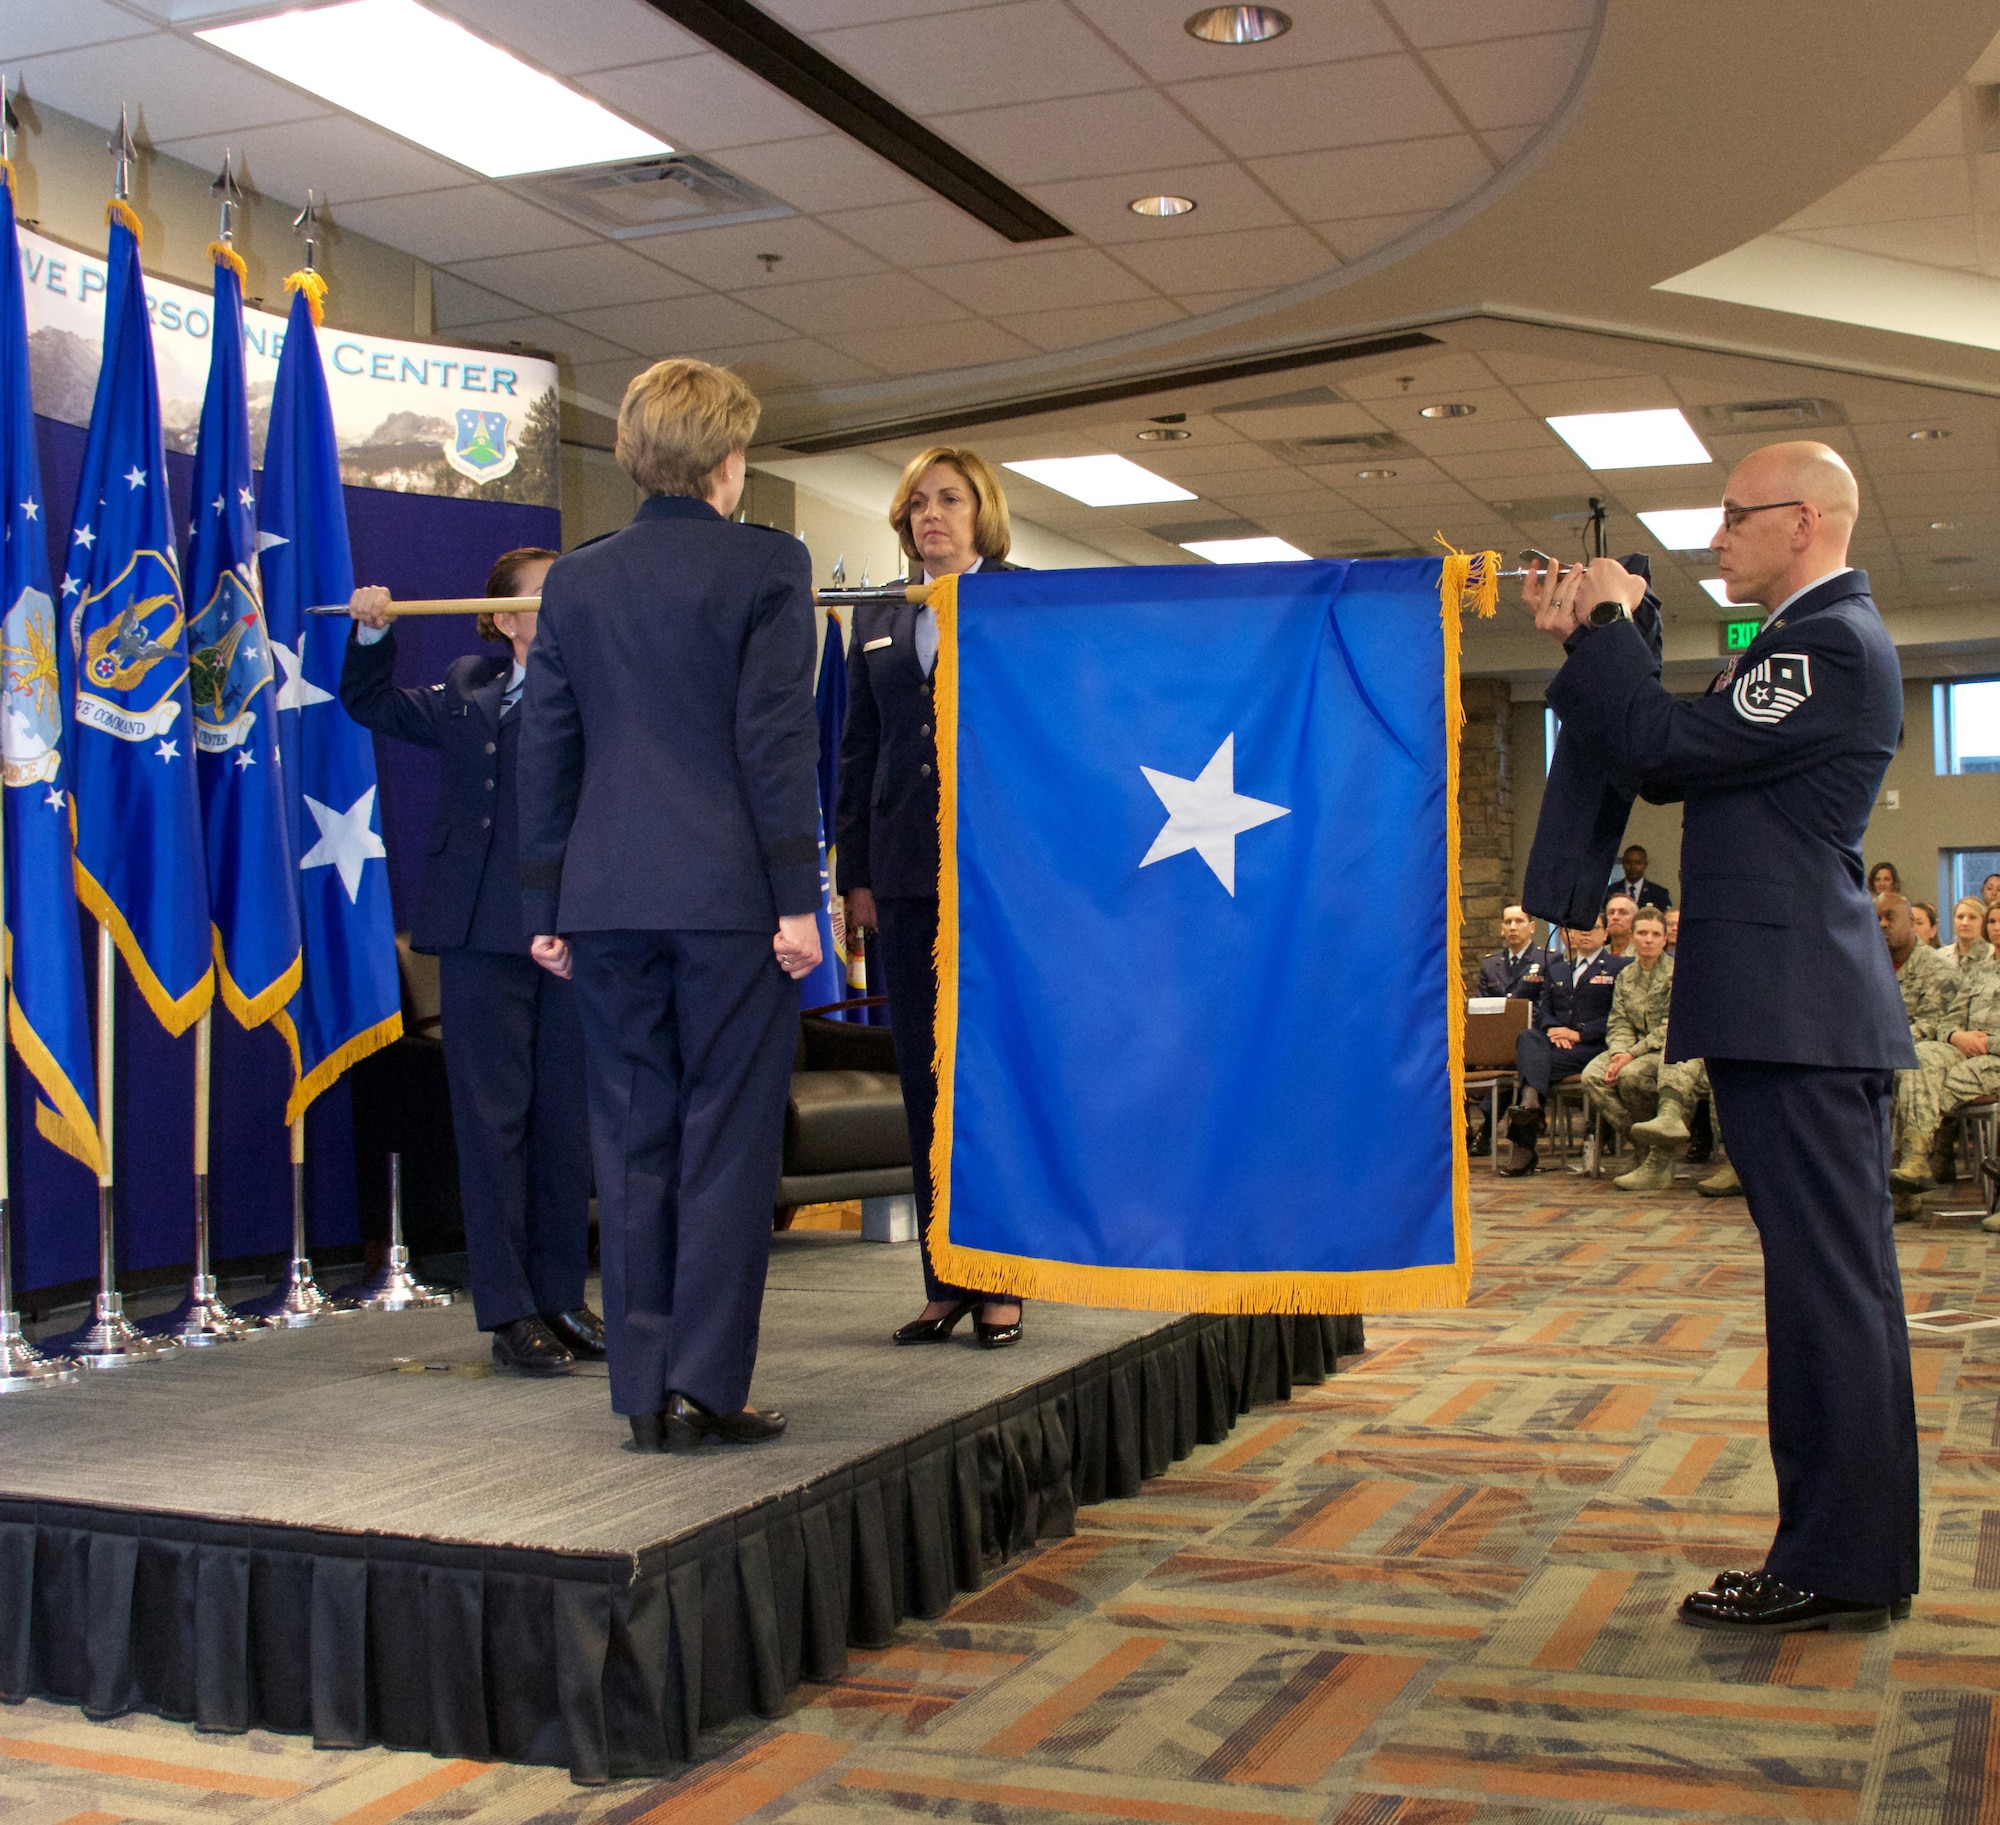 Brig. Gen. Ellen Moore (center), Commander, Air Reserve Personnel Center, stands at attention while her one star flag is unfurled by Senior Amn. Minette Ramirez (left) and Master Sgt. Jessie Thomas (right), and Lt. Gen. Maryanne Miller, Chief of Air Force Reserve and Commander, Air Force Reserve Command, looks on. The presentation was part of Moore's promotion ceremony Jan. 27, 2017, at Buckley Air Force Base, Colo. Moore is the first female brigadier general to command ARPC.  (U.S. Air Force photo by Master Sgt. Rick Grybos)